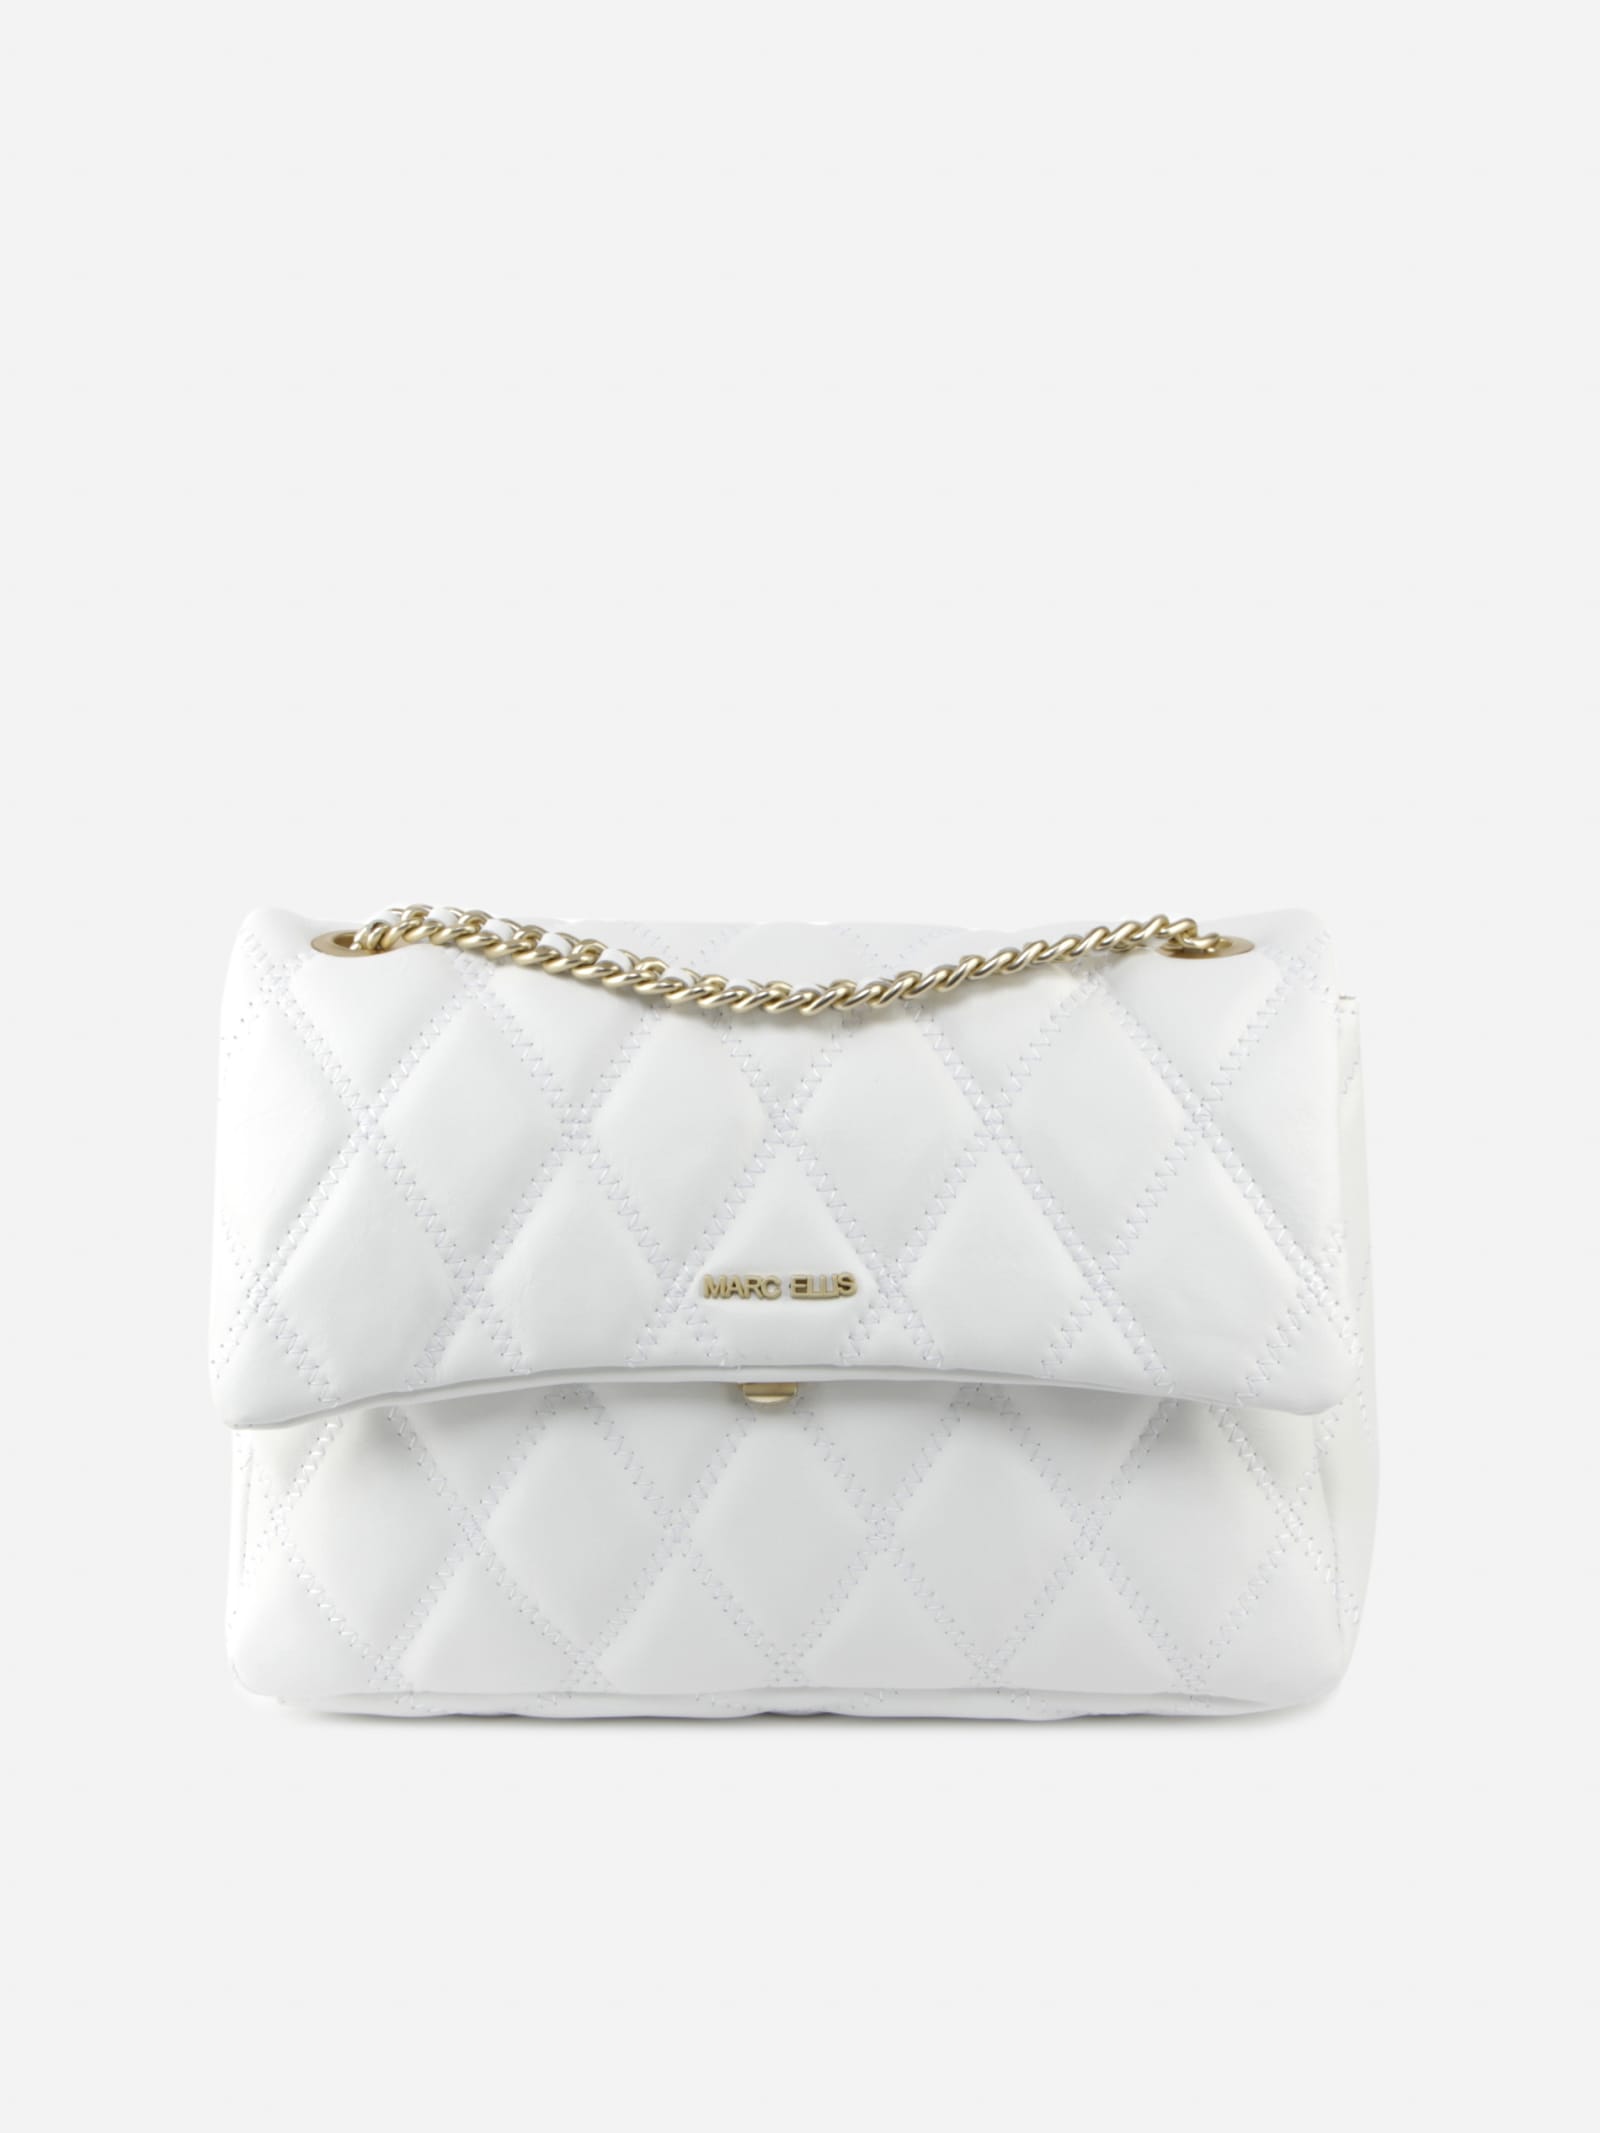 Marc Ellis Desdemona L Bag In Quilted-effect Leather